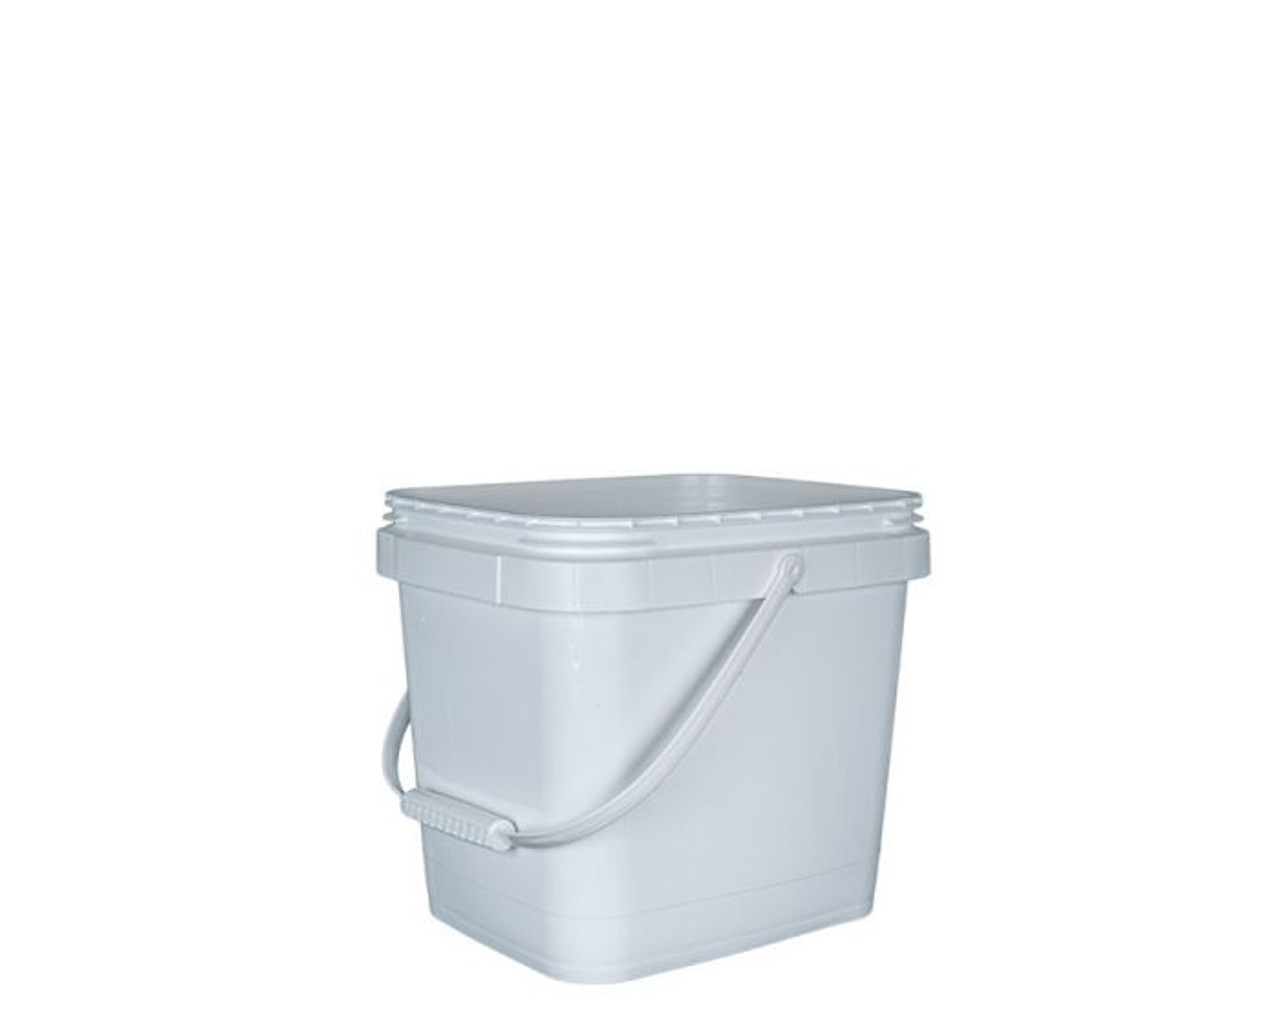 3 1/2 Gallon EZ Stor® Plastic Container with Handle